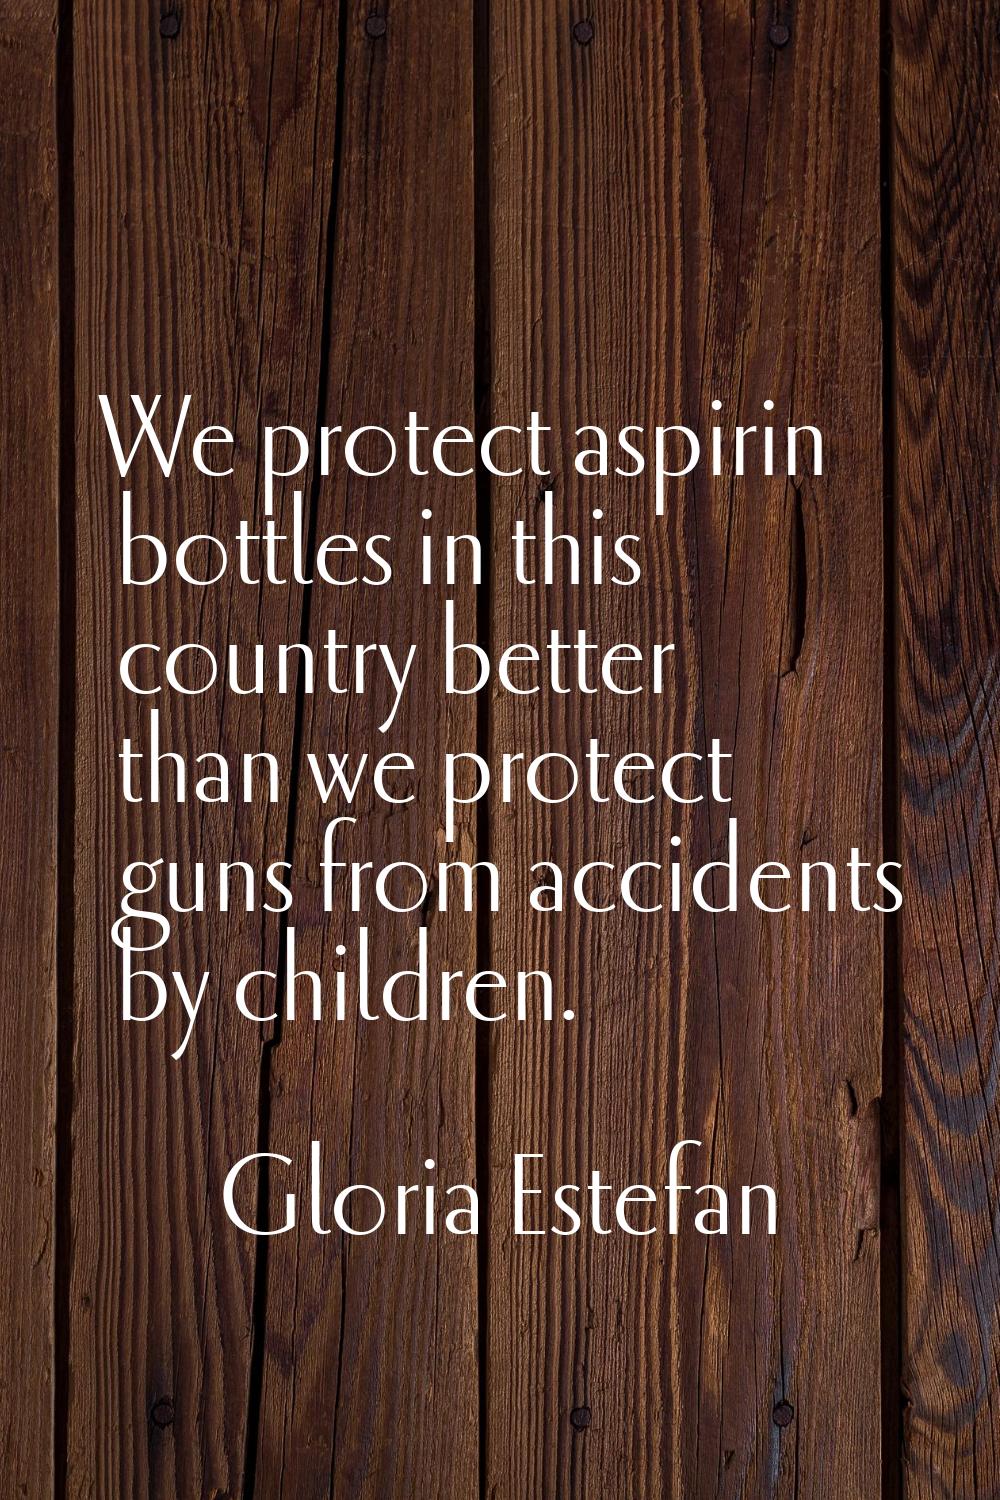 We protect aspirin bottles in this country better than we protect guns from accidents by children.